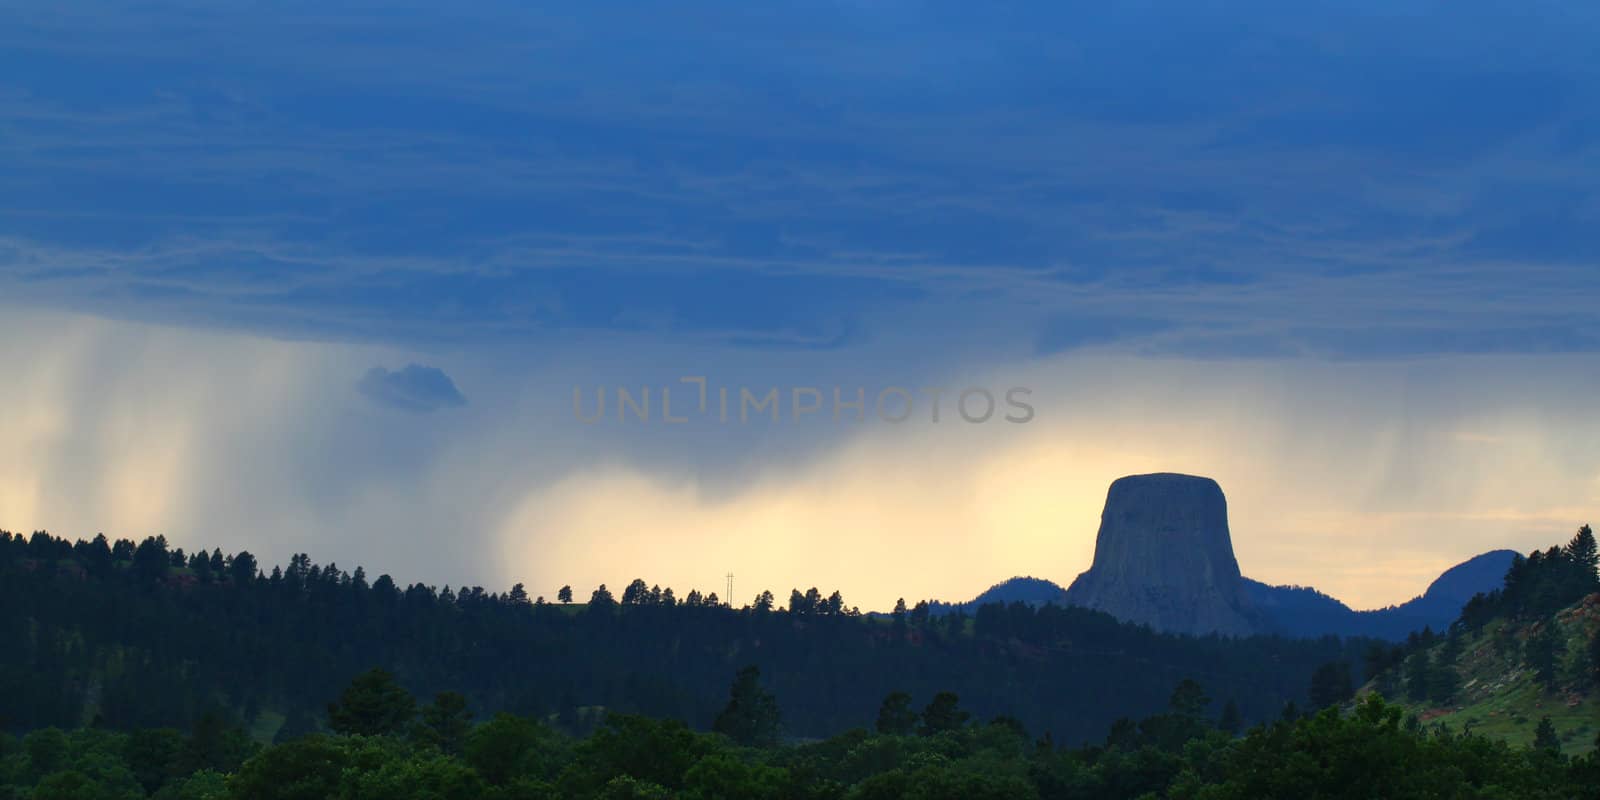 Evening rainstorm against sunset over Devils Tower National Monument in northeastern Wyoming.